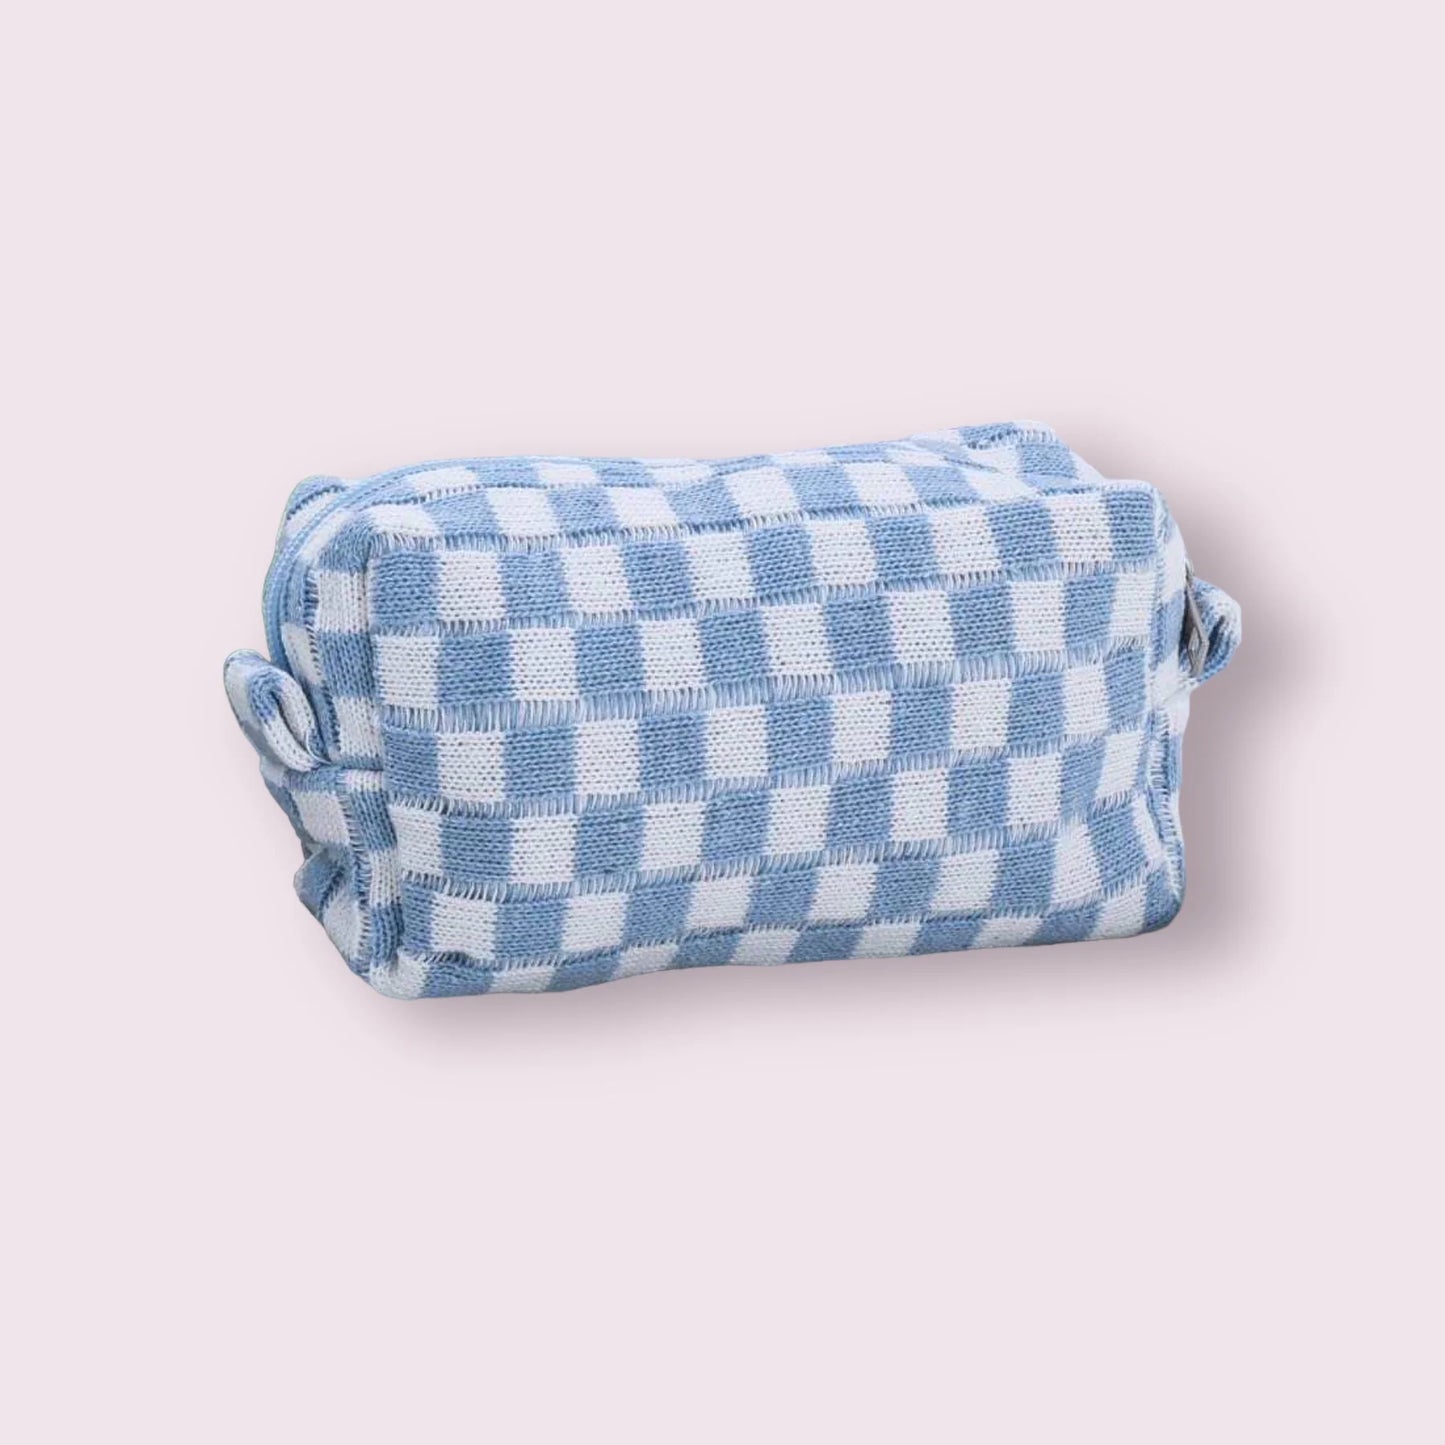 Small checkered bags